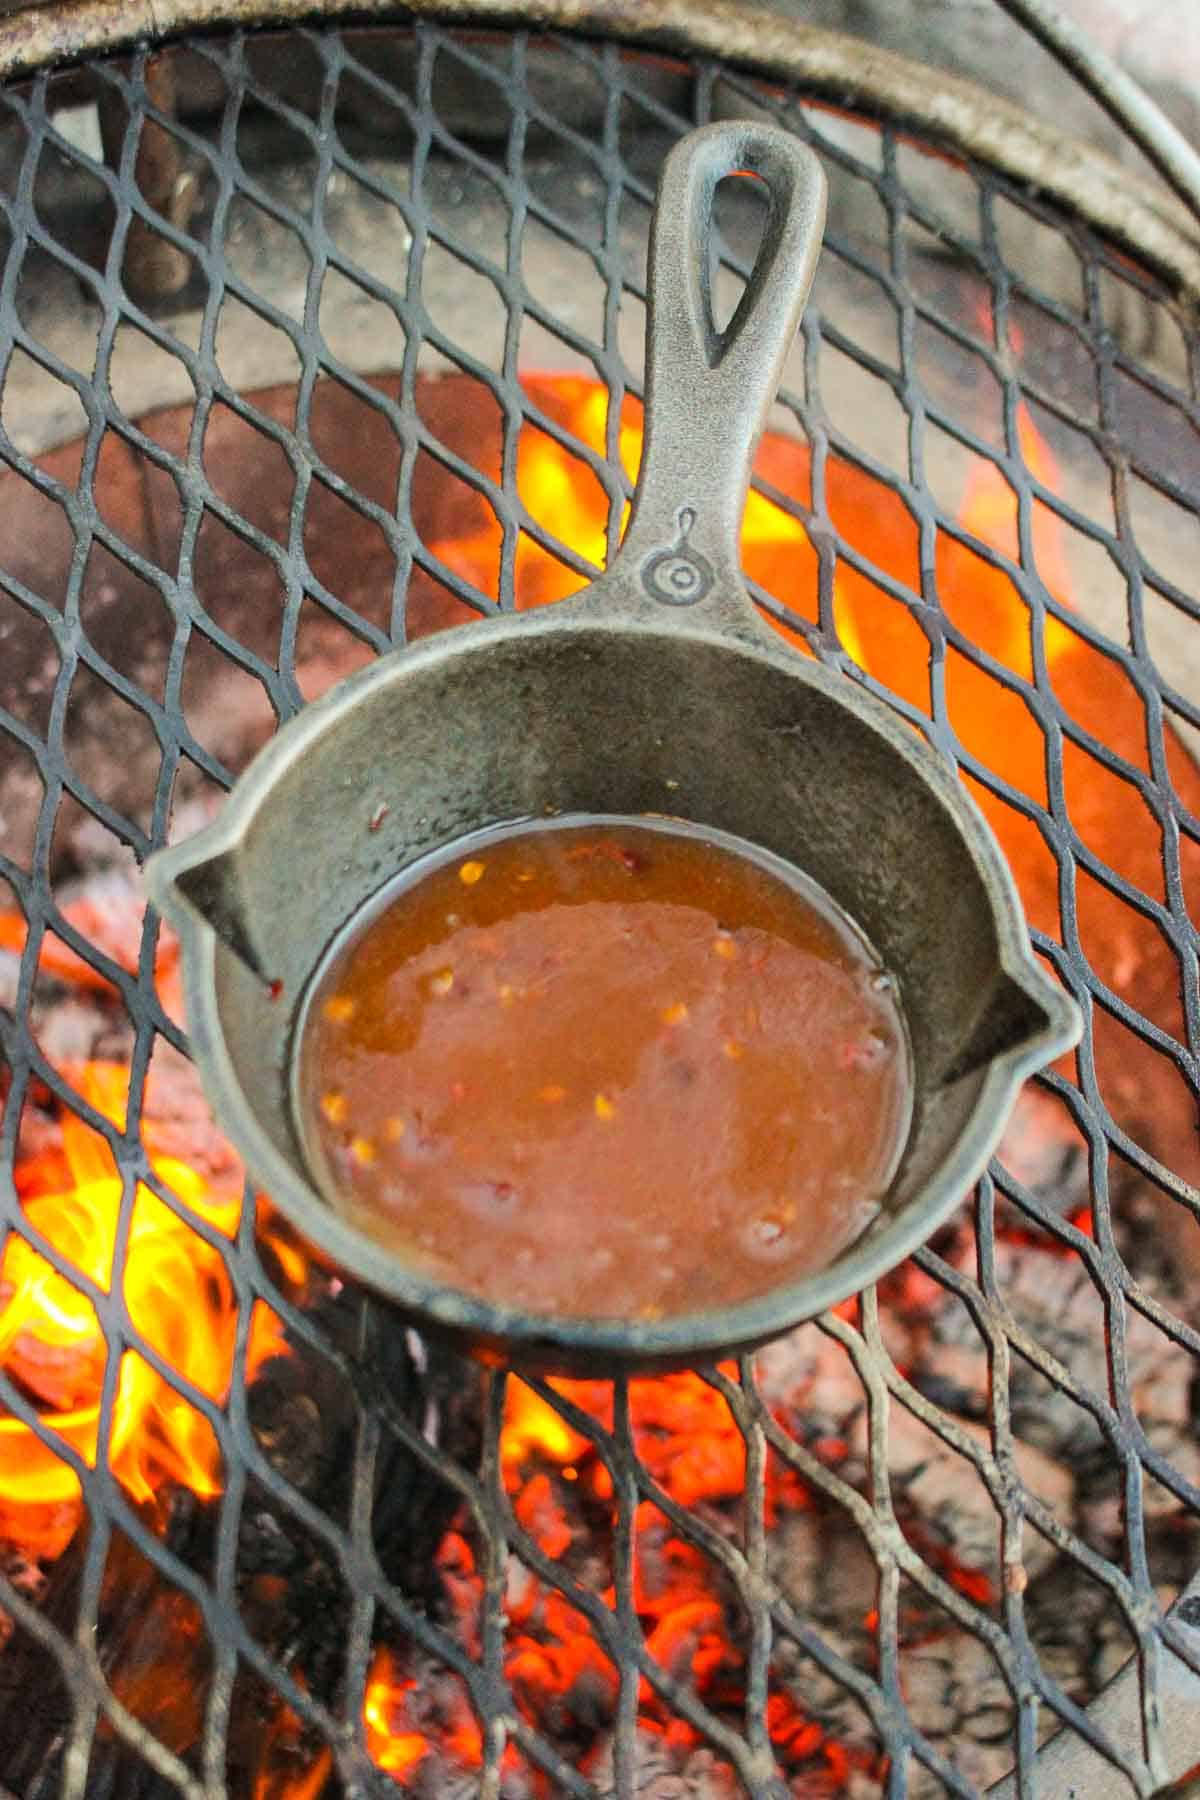 The hot honey butter simmering together in a skillet on a grill.